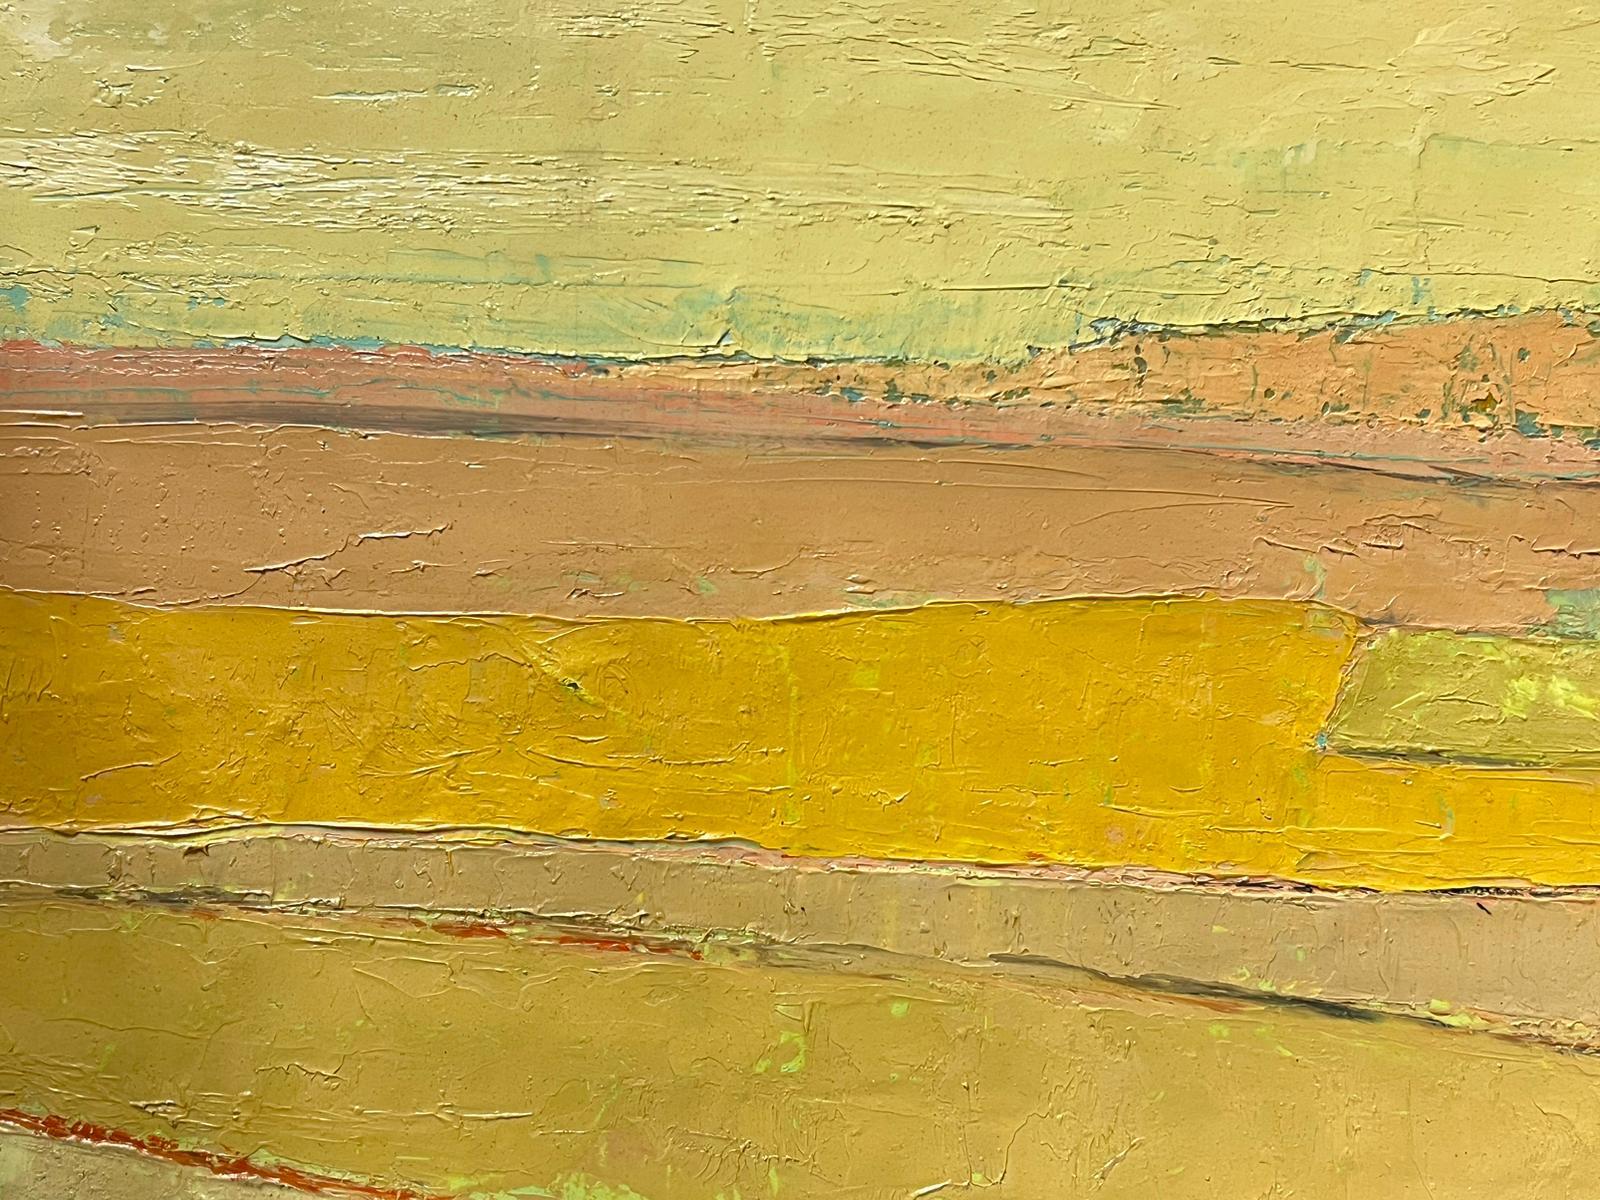 Yellow Landscape
signed by Lucien Gondret (French 1941-2023)
signed oil on canvas, unframed
canvas: 18 x 24 inches
provenance: the artists estate, France
condition: very good and sound condition